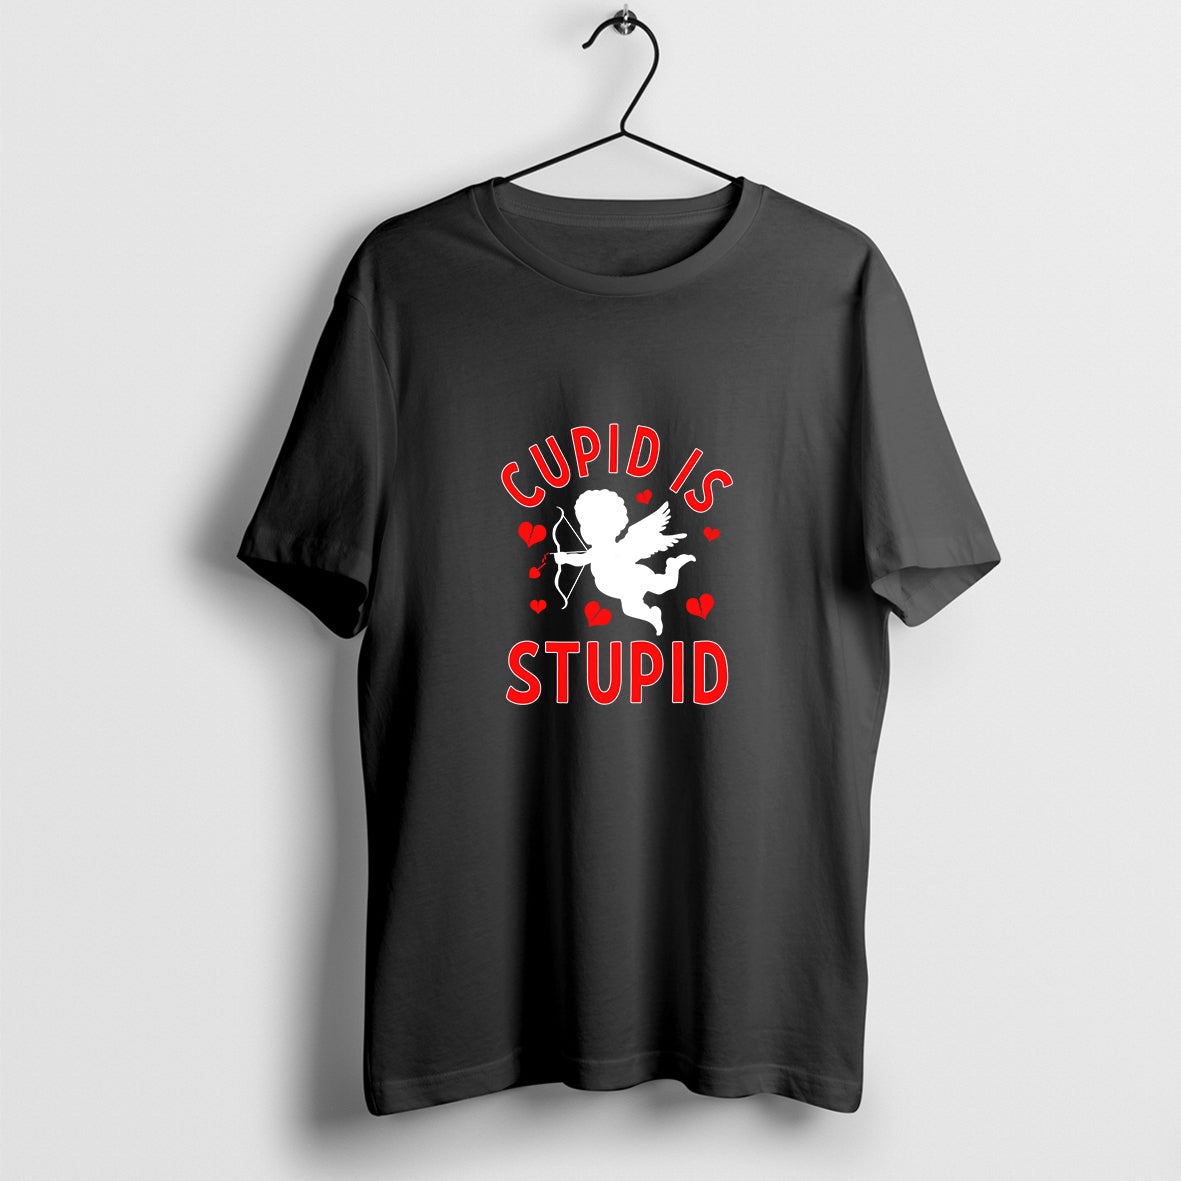 Cupid Is Stupid T-Shirt, Cupid Shirt, Anti-Valentines Day Shirt, Love Shirt, Gift for Valentine